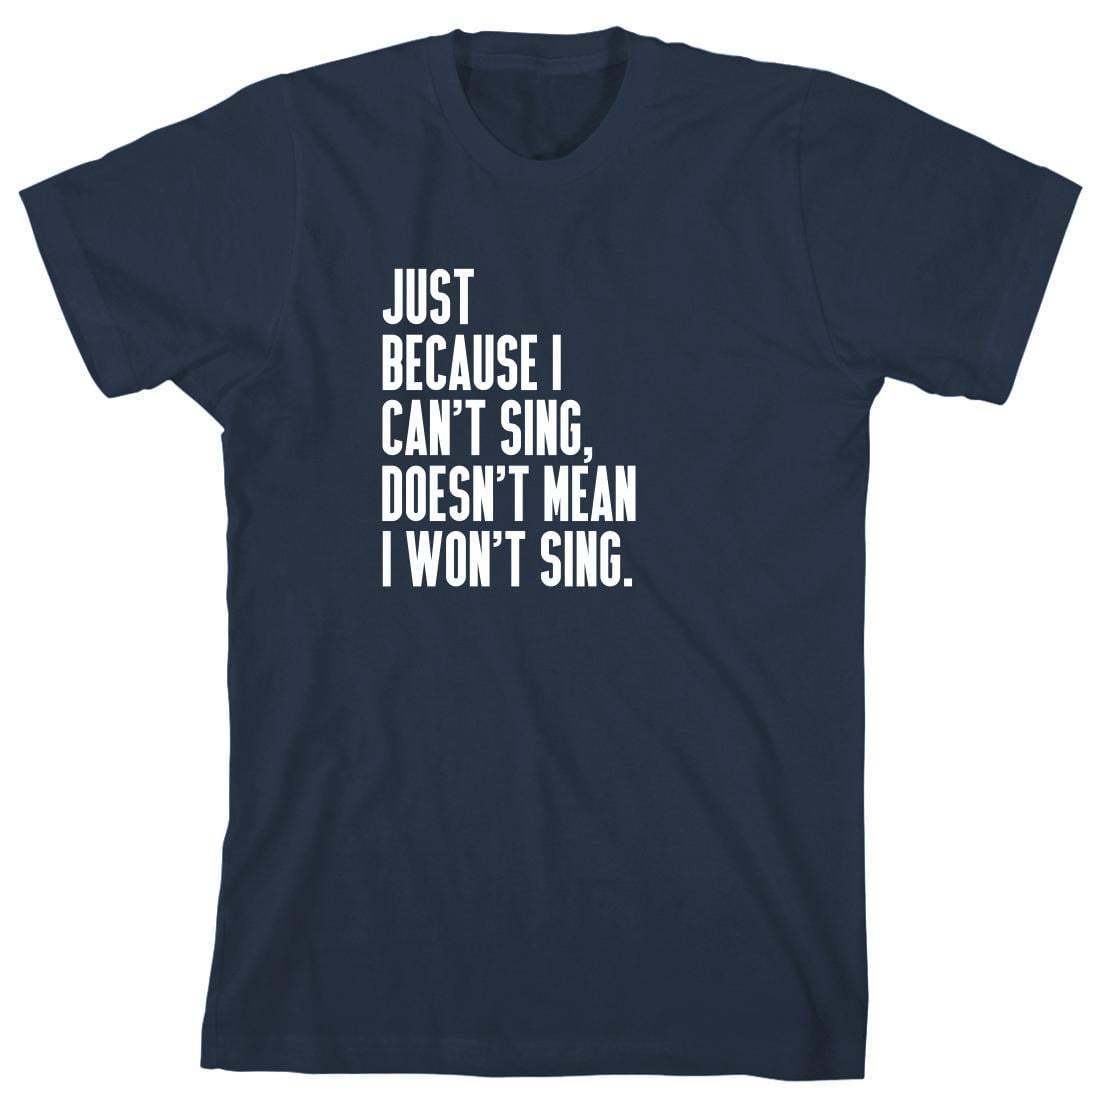 I Don't Have The Time or The Crayons to Explain to You | Funny Sarcastic  T-Shirt Sarcasm Shirt for Men Women